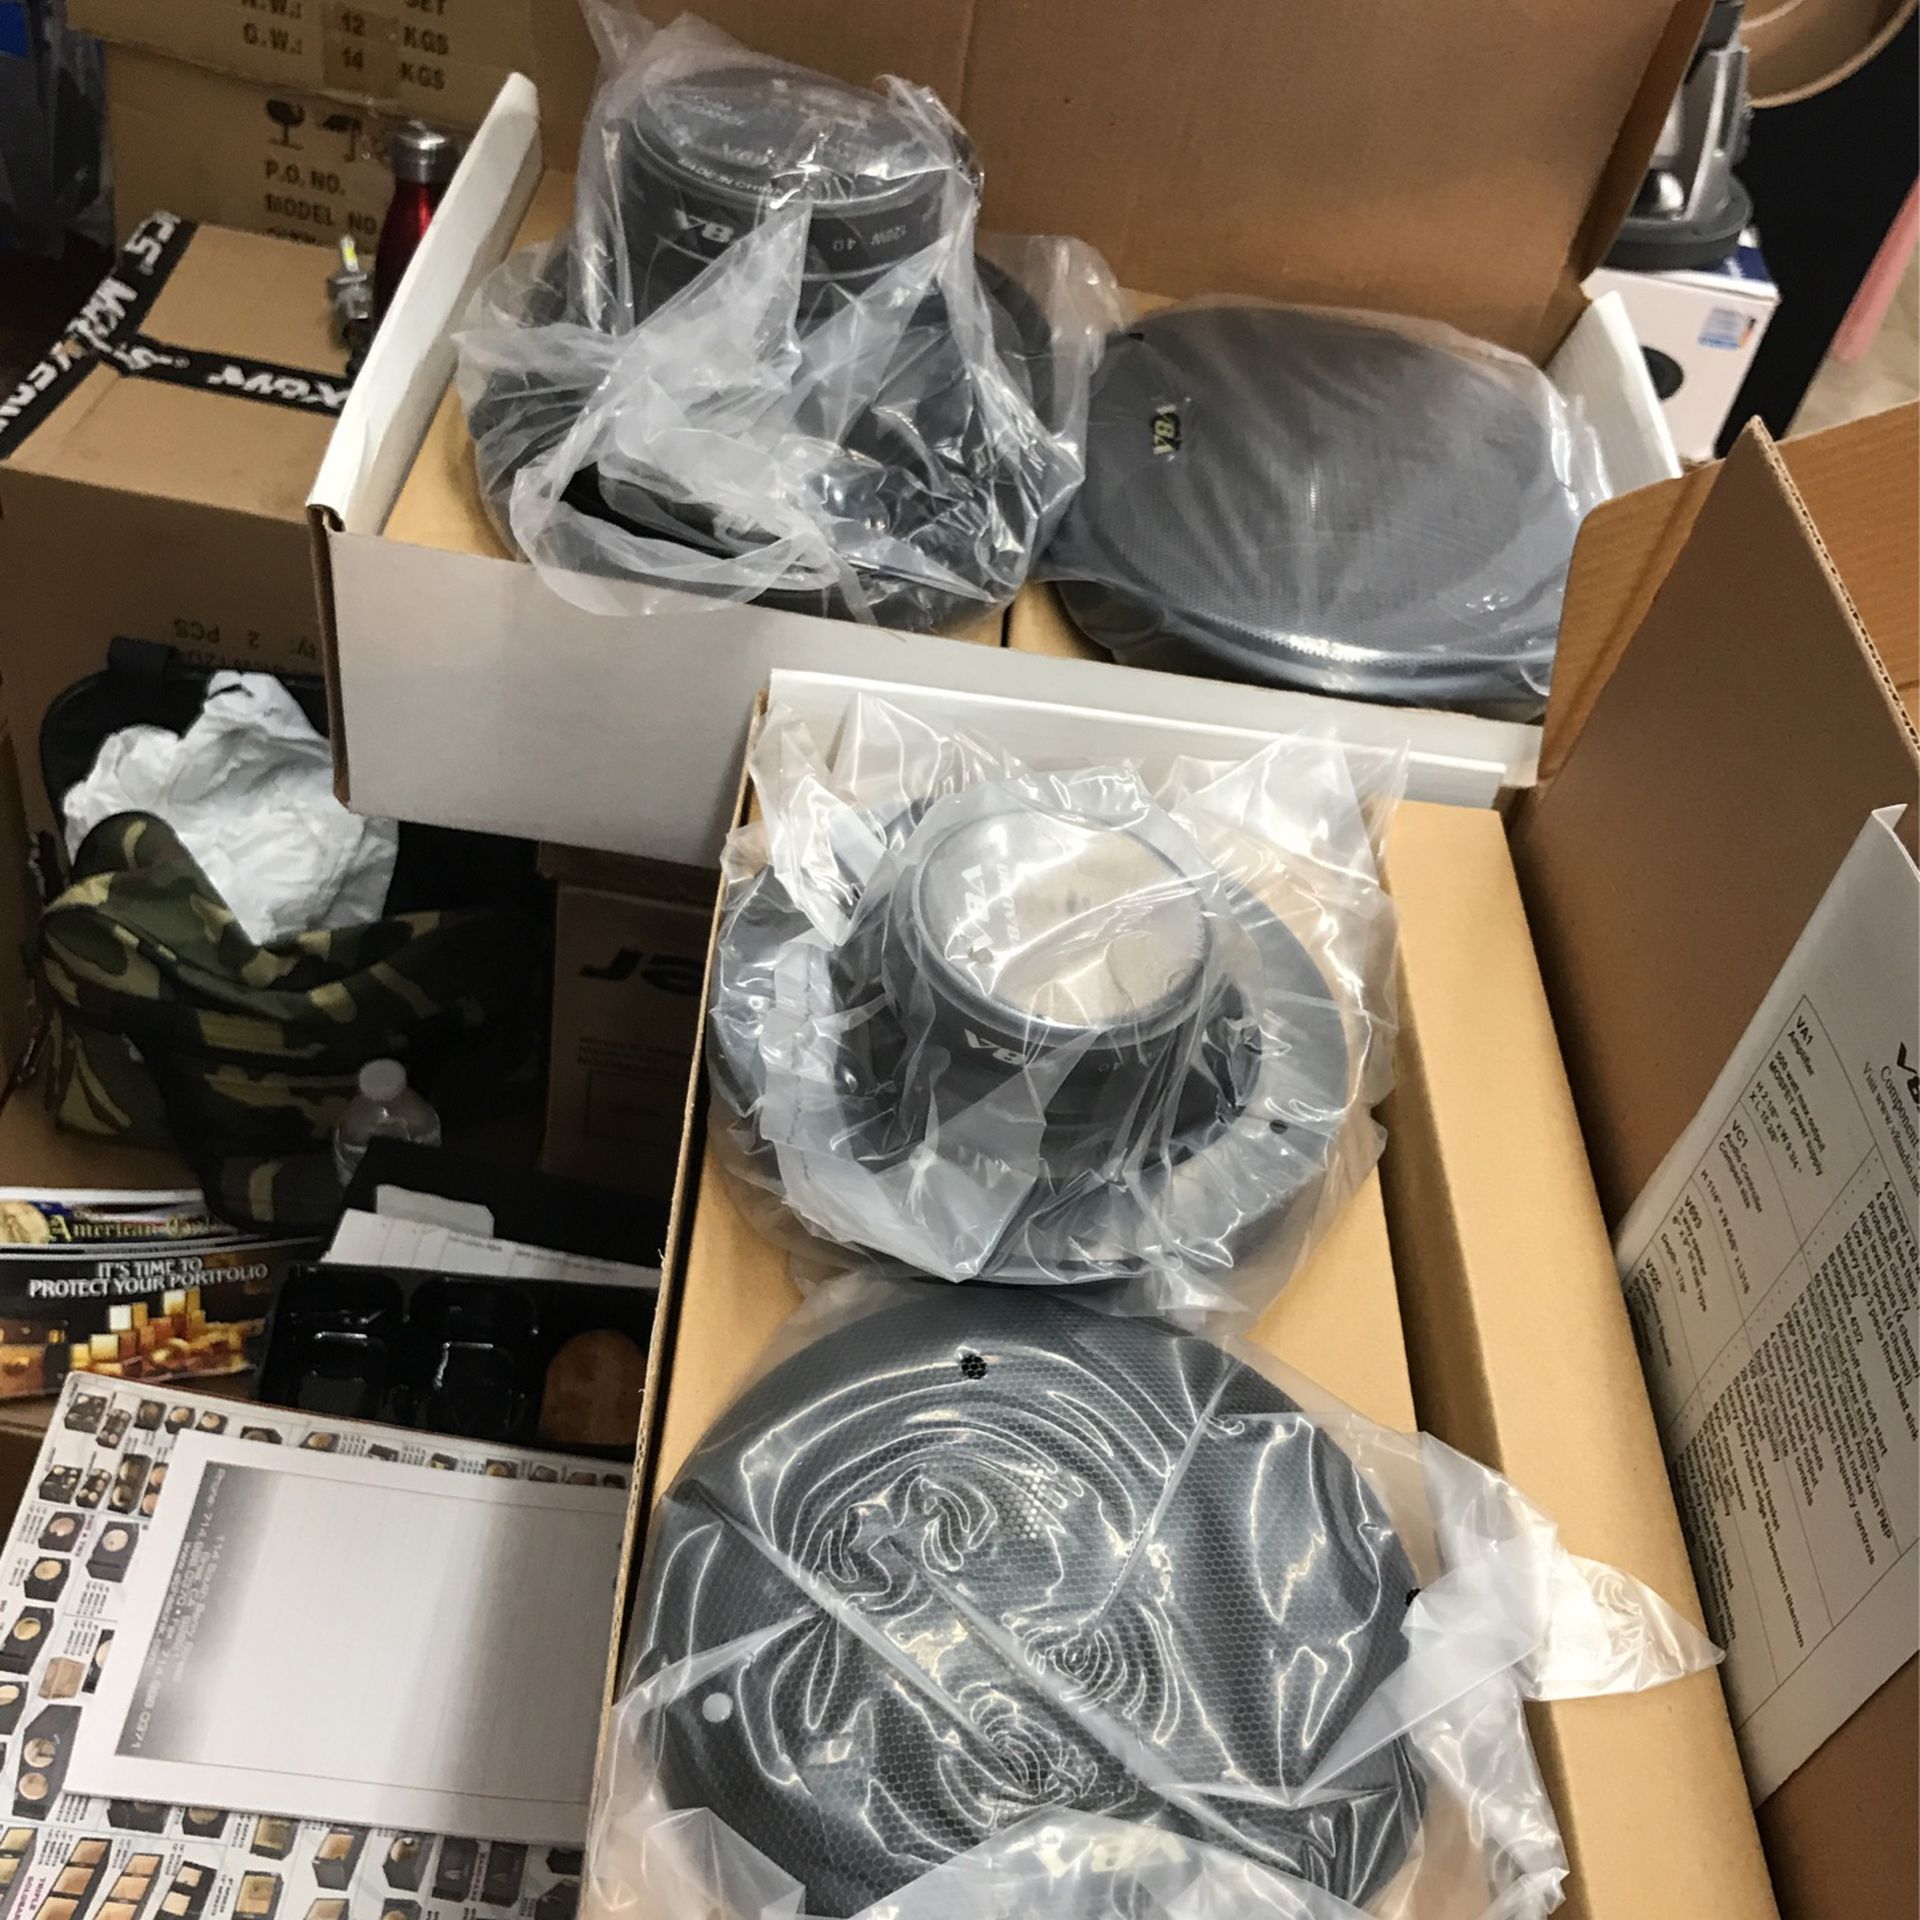 Car Audio Speakers 69 3 Ways And 61/2 Component  Sets 99$ 